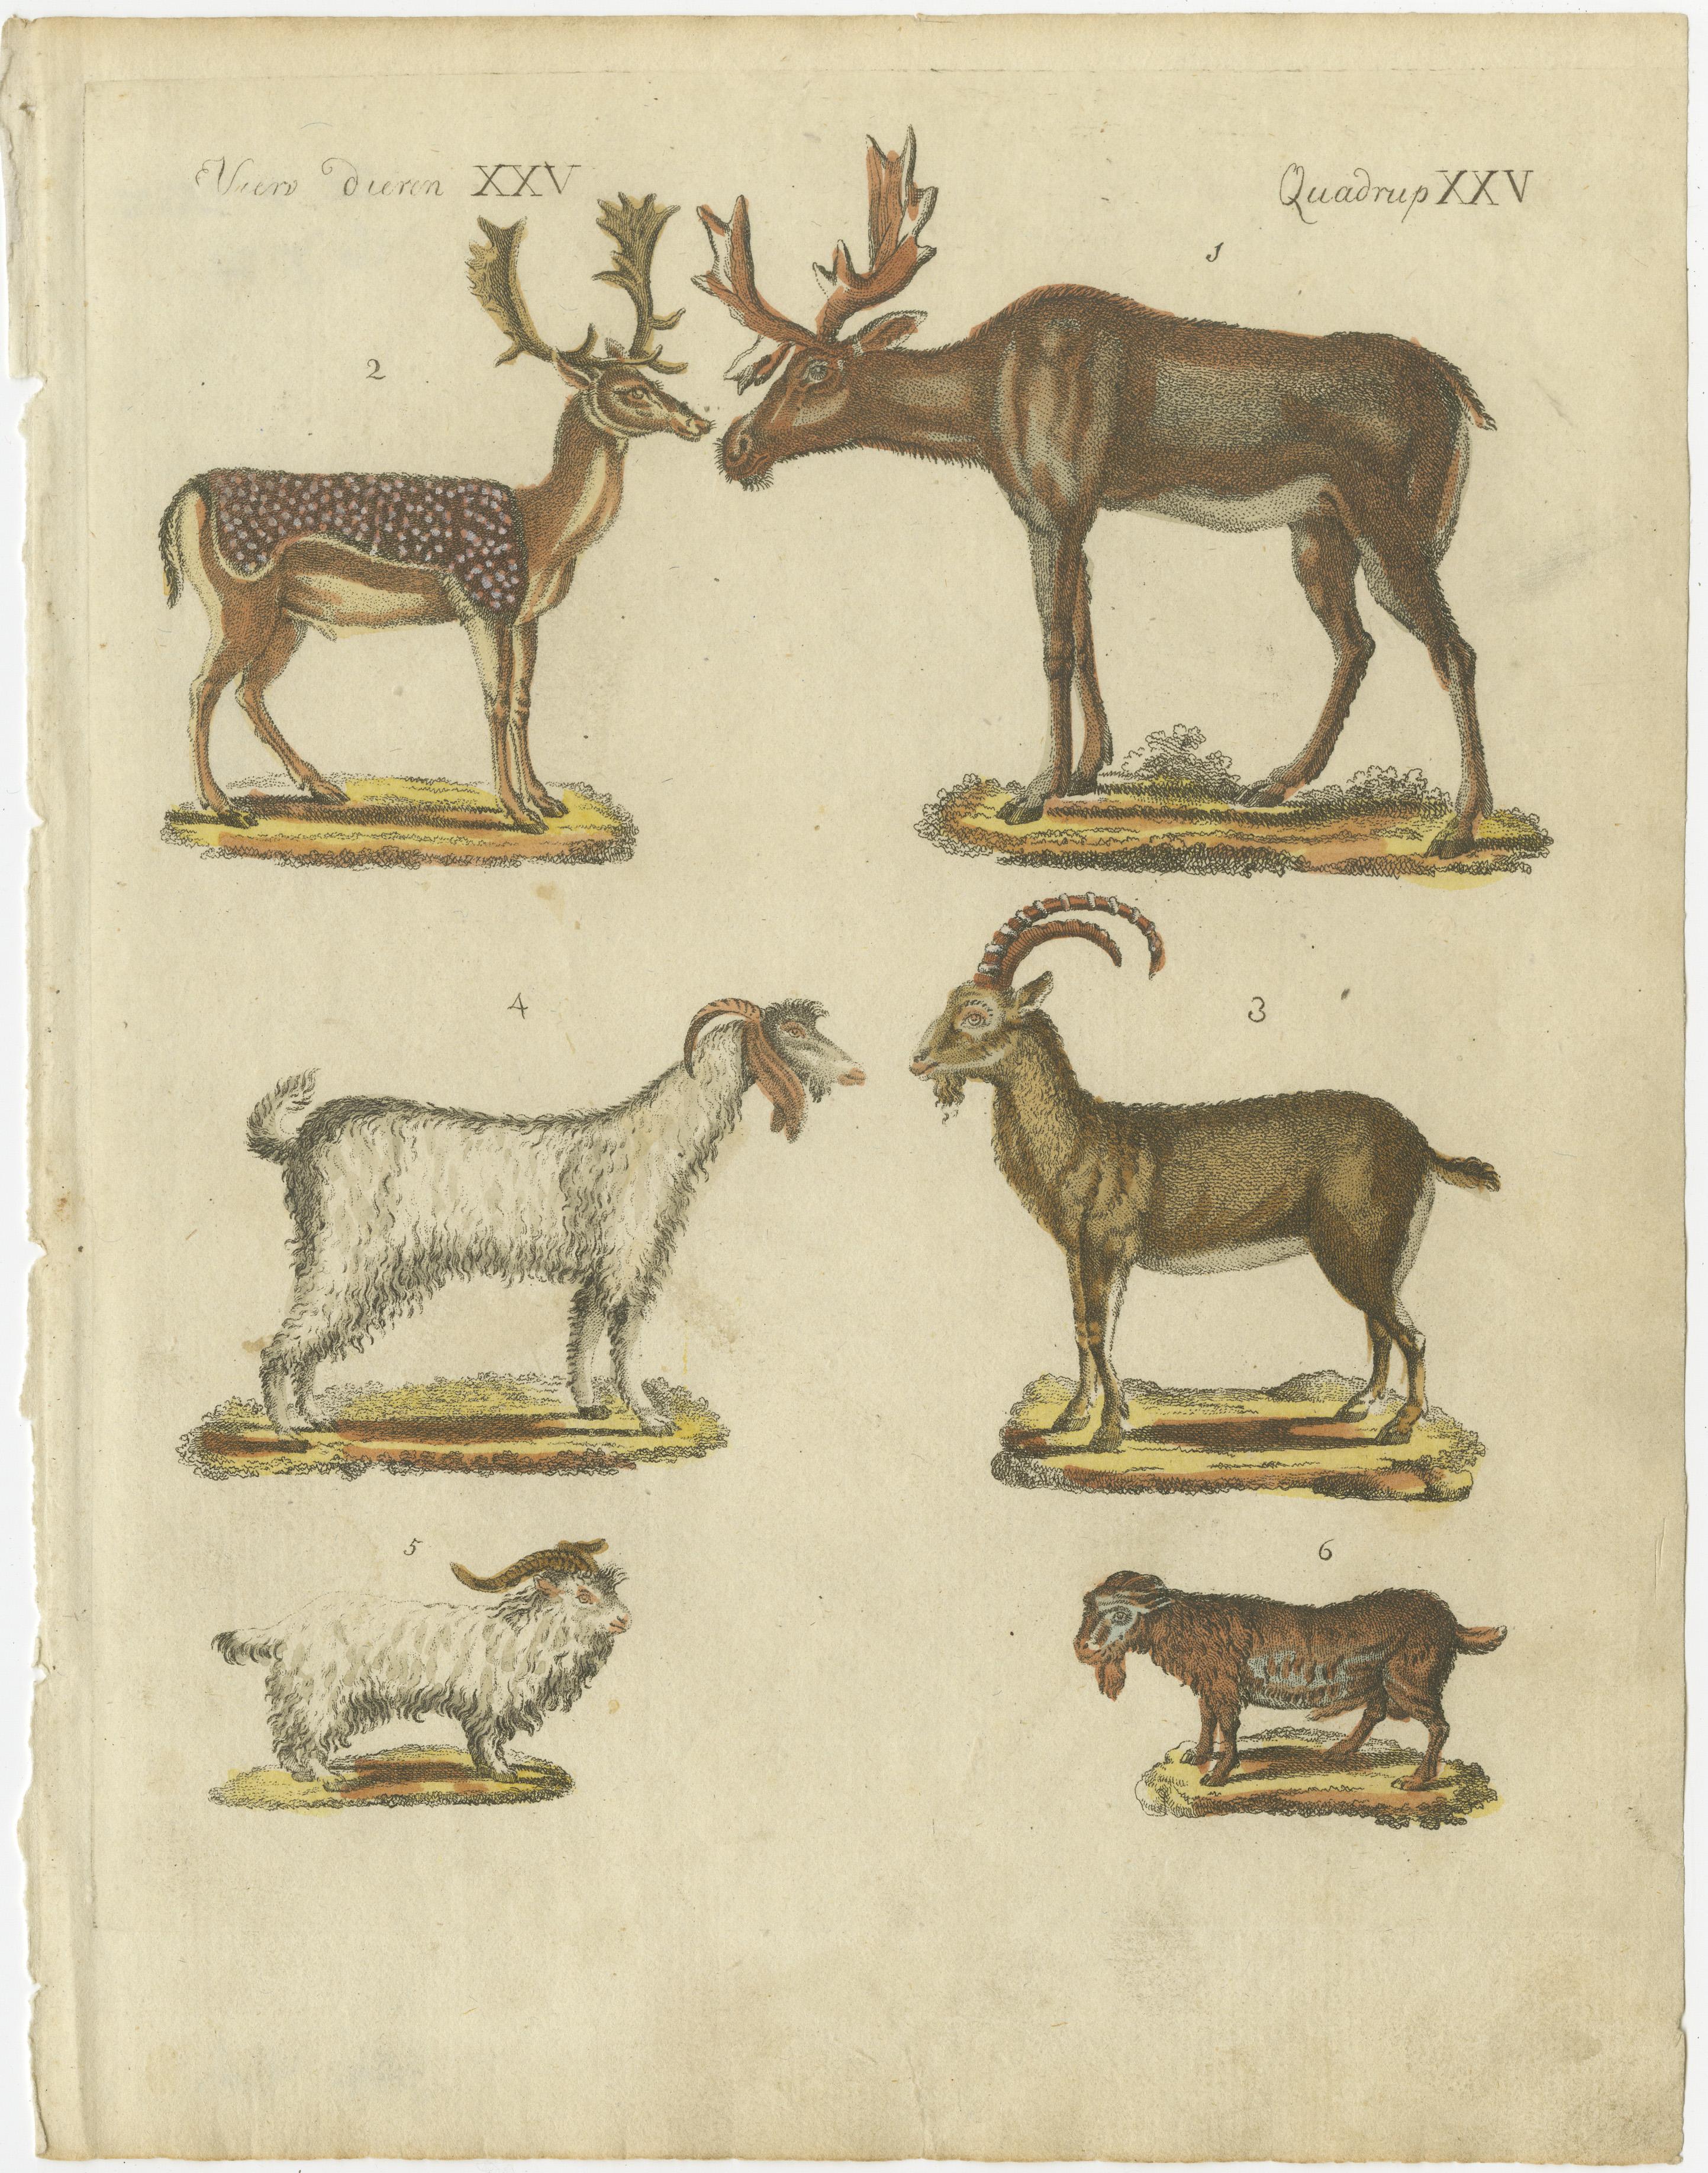 Original antique print of deer and (billy) goats. This engraved print originates from a very rare unknown Dutch work. The plates are similar to the plates in the famous German work: ‘Bilderbuch fur Kinder' by F.J. Bertuch, published 1790-1830 in